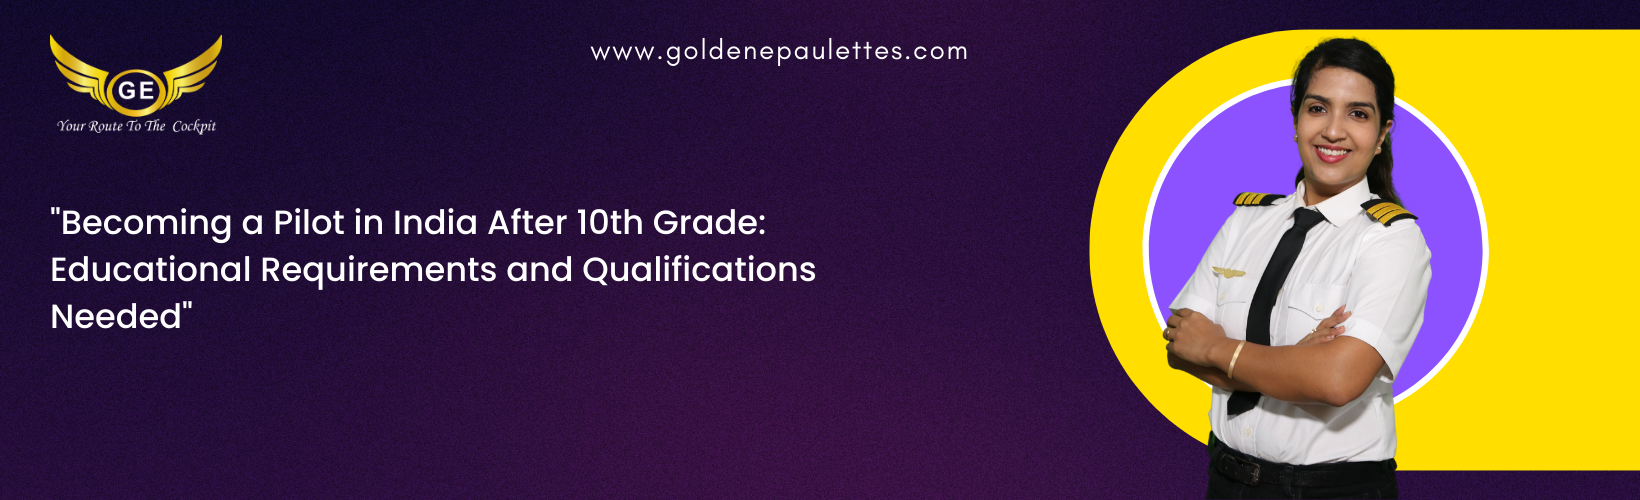 What Are the Qualifications Needed to Become a Pilot in India After 10th Grade